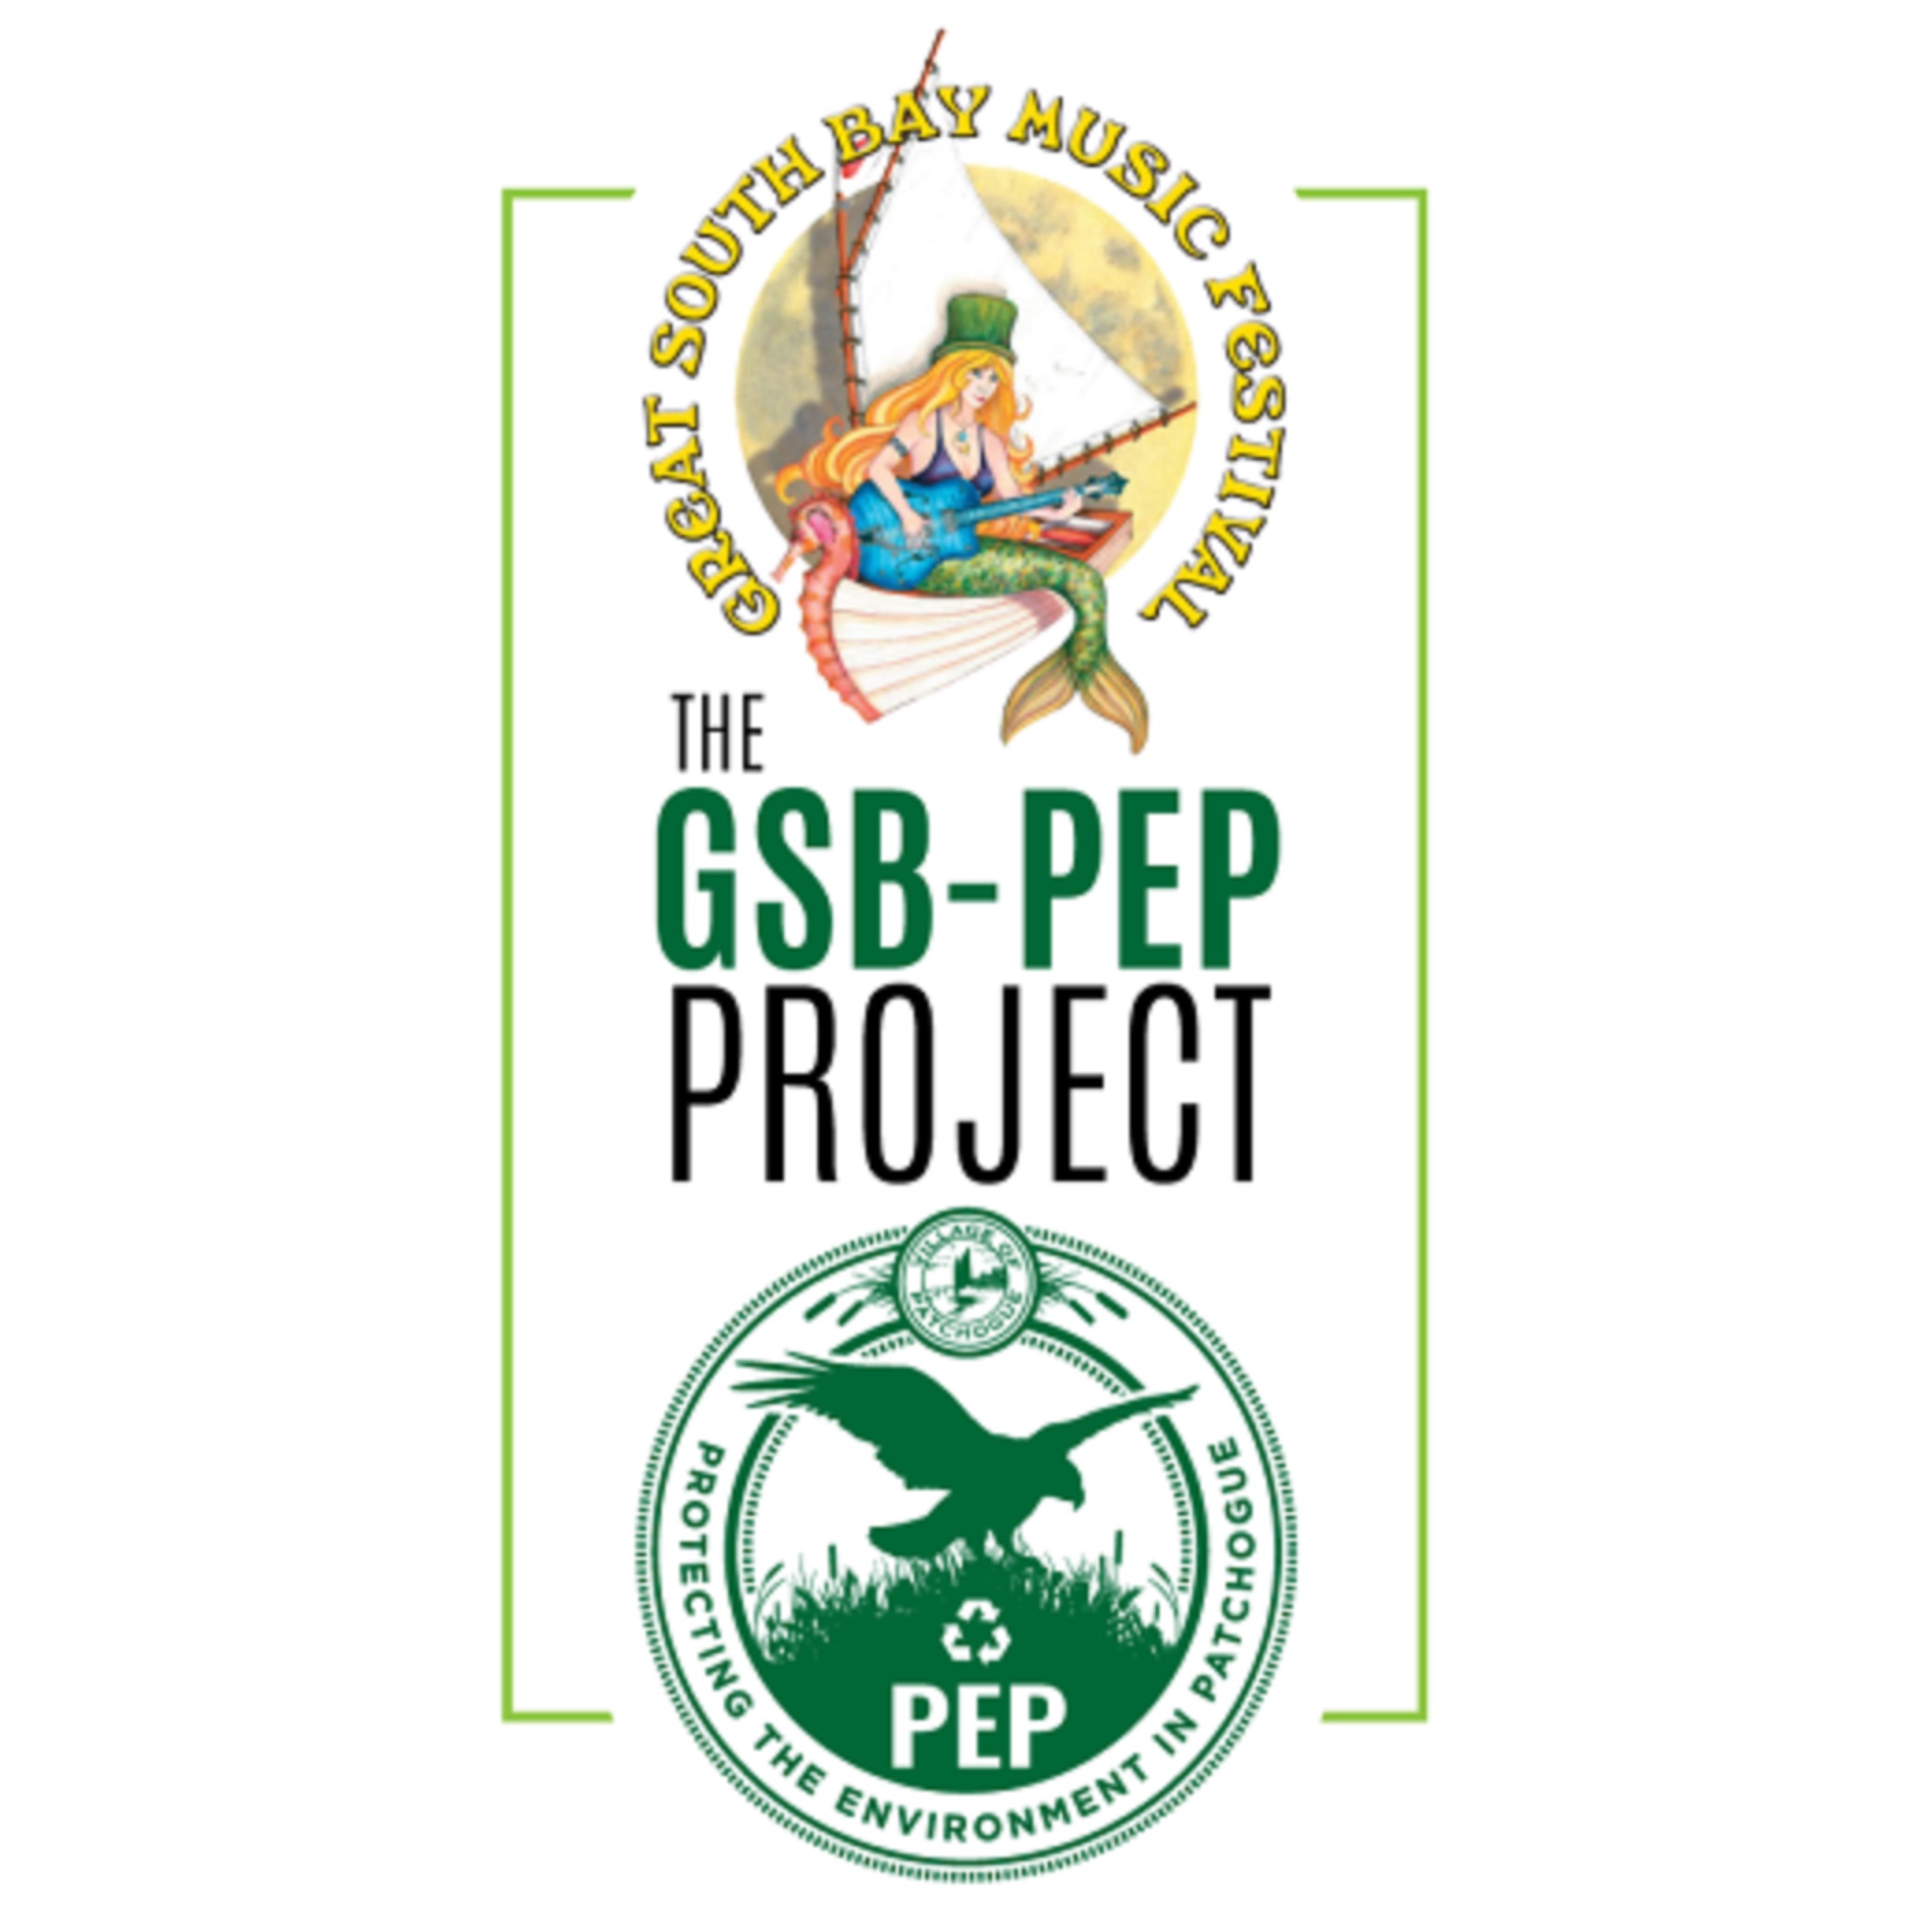 THE GSB-PEP Project announces long islands first sustainable music festival in the Village of patchogue